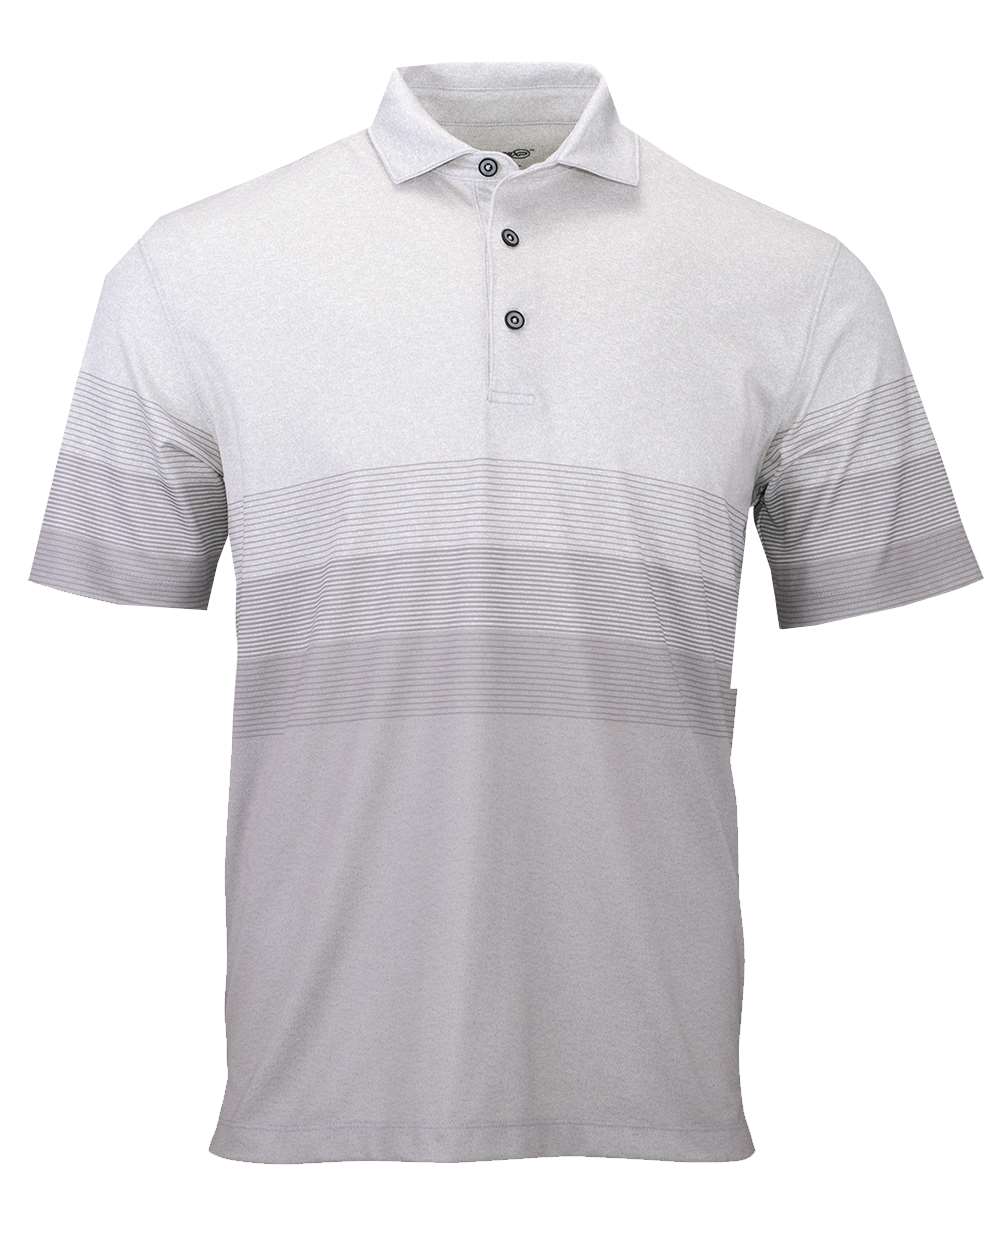 Paragon 153 - Belmont Sublimated Heathered Polo